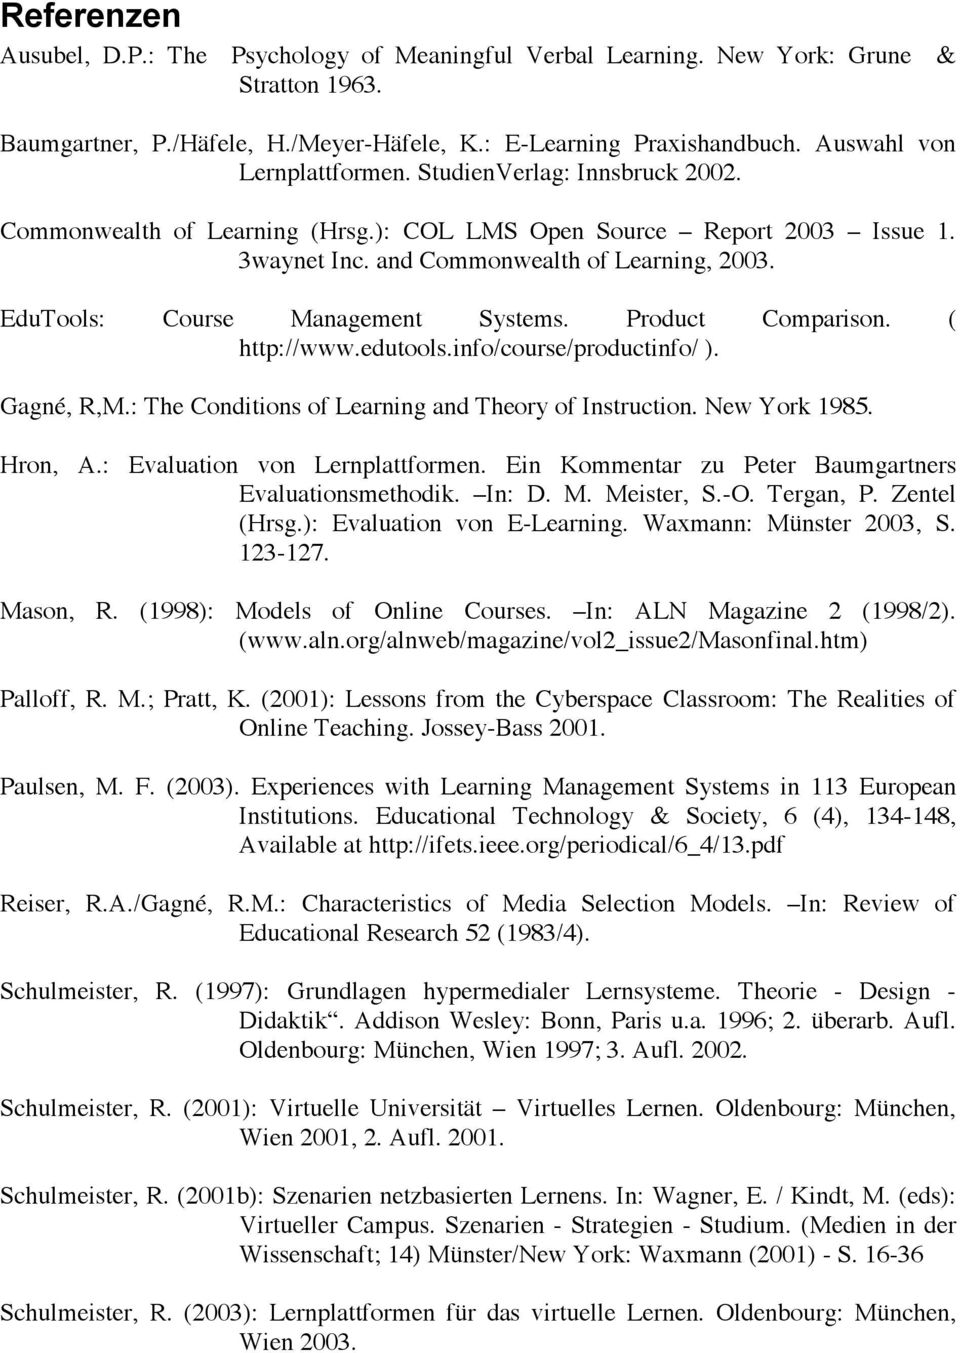 EduTools: Course Management Systems. Product Comparison. ( http://www.edutools.info/course/productinfo/ ). Gagné, R,M.: The Conditions of Learning and Theory of Instruction. New York 1985. Hron, A.